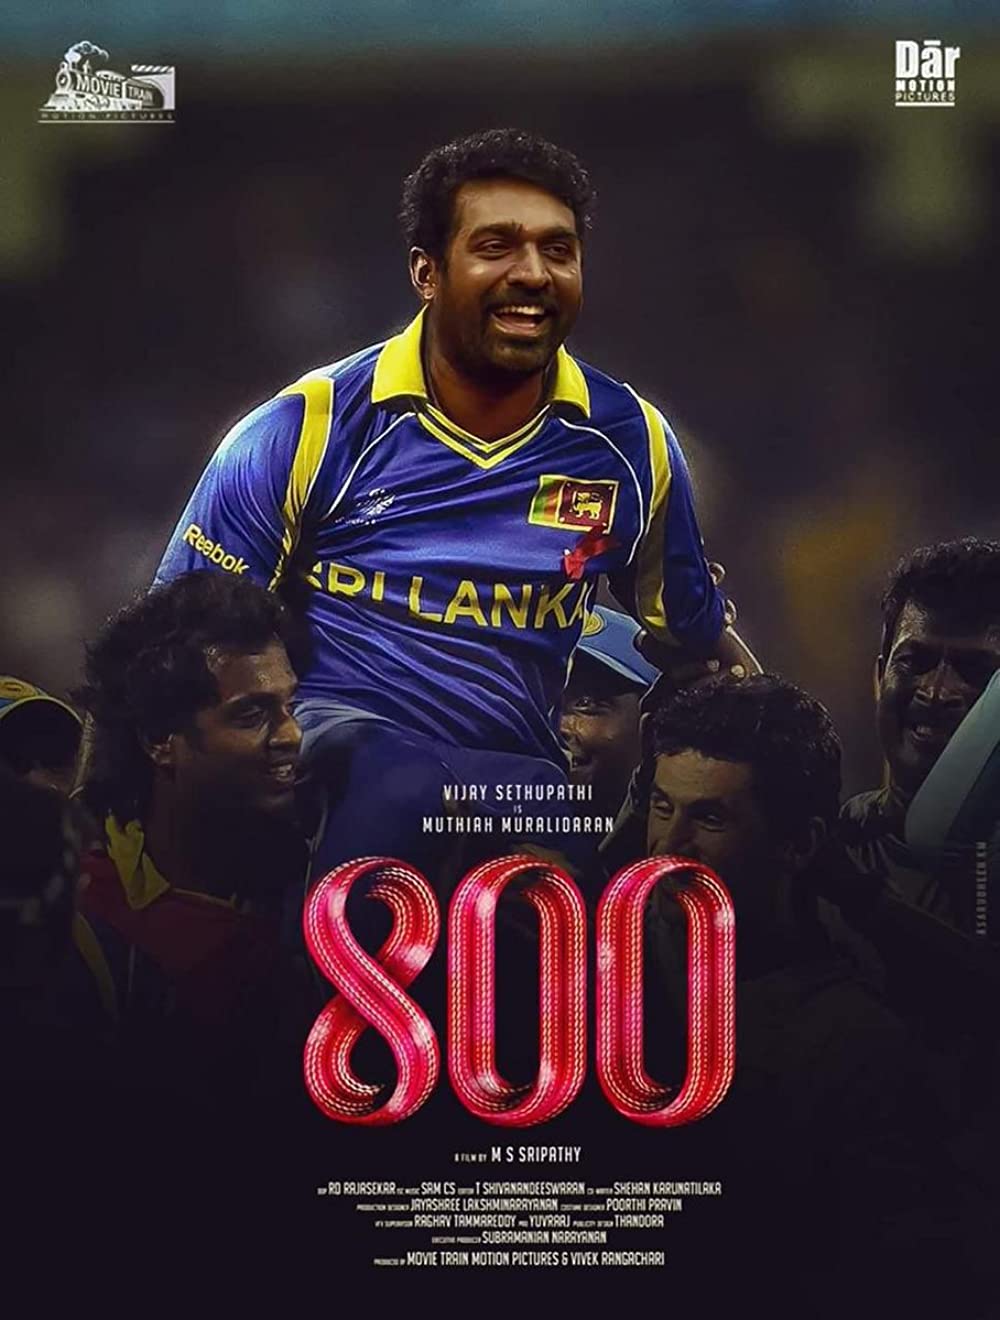 800 movie nearly in completion directed by Sripathy